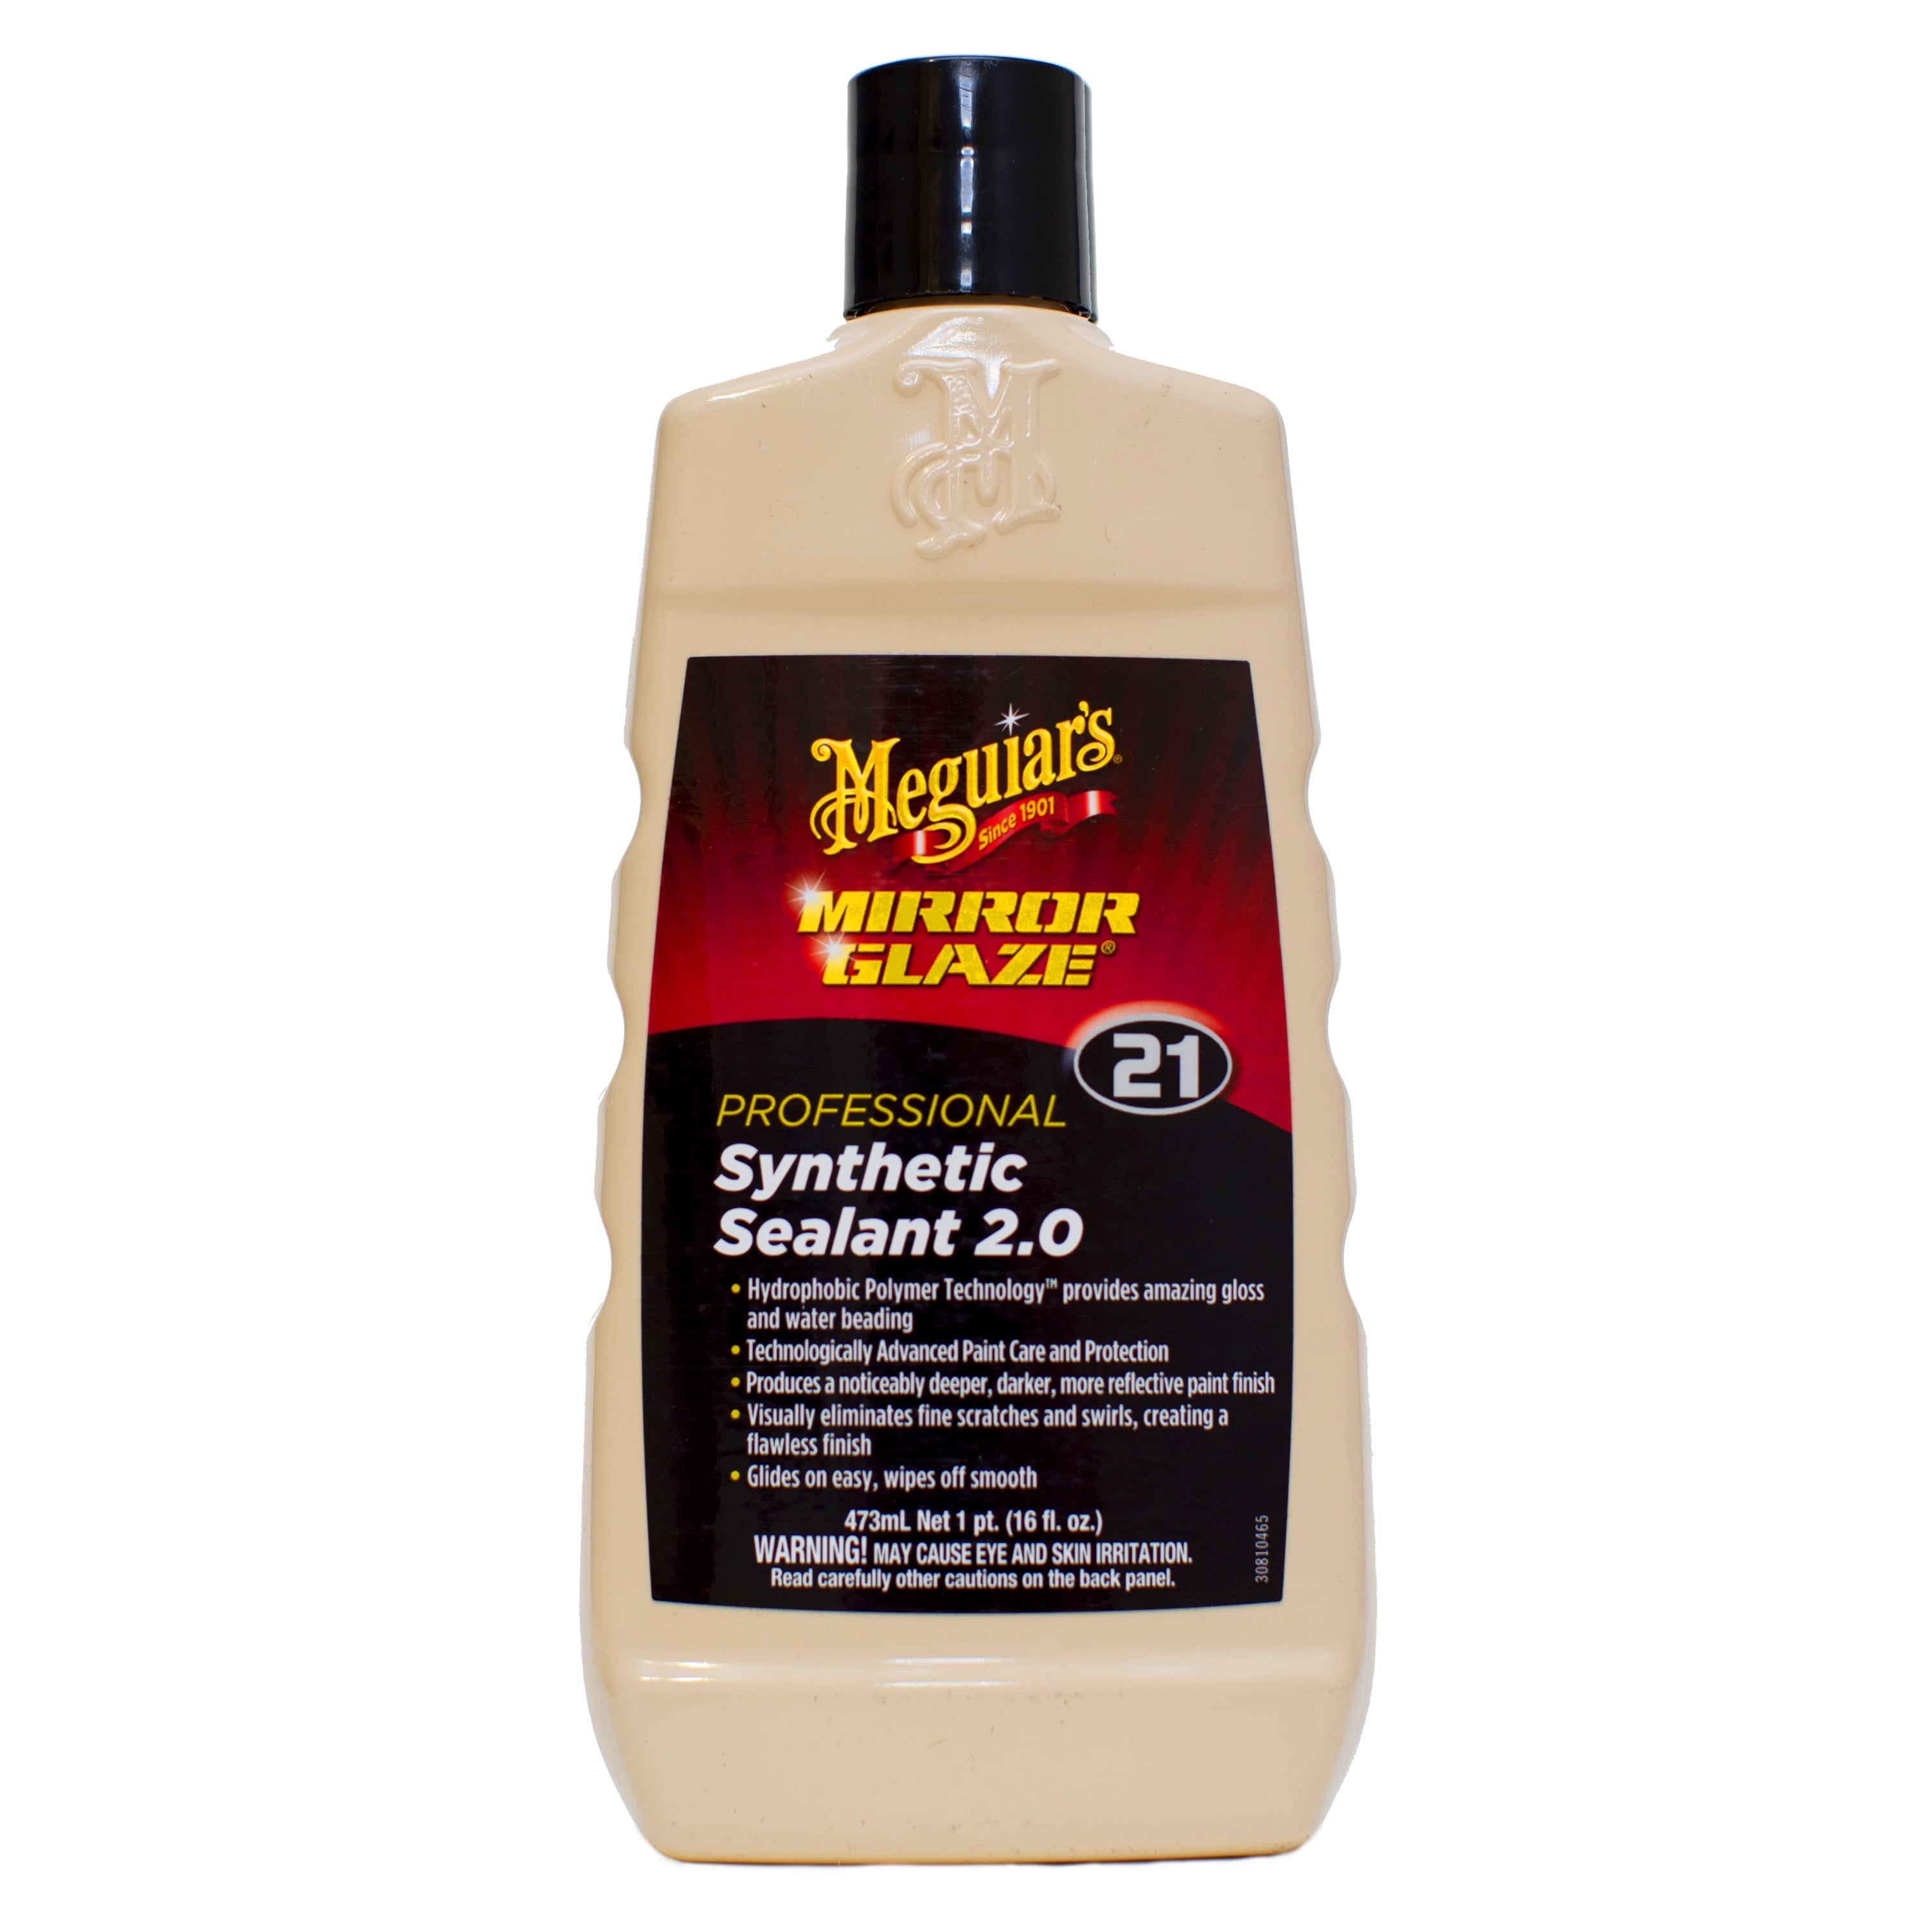 Is Meguiars The Brand To Use? We Put It To The Test To Find Out